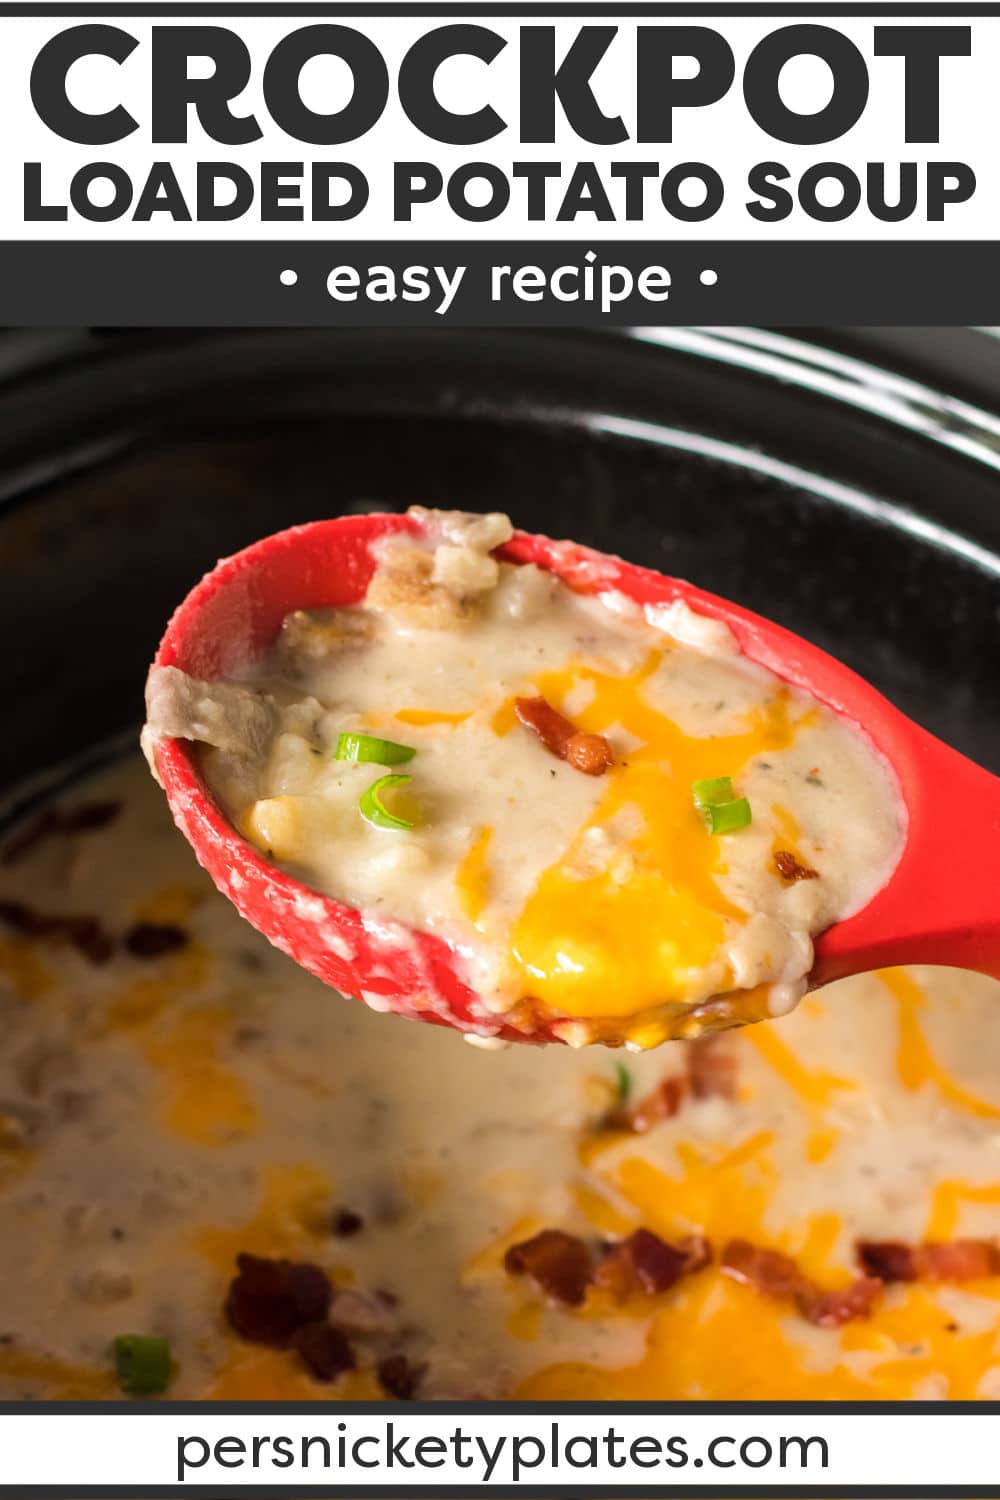 Slow cooker potato soup is thick, creamy, and tastes just like a loaded baked potato in the form of a warm and cozy soup! With just a few minutes of prep to sauté bacon and chop the potatoes (you don’t even need to peel them), it’s the crockpot that does all the work! | www.persnicketyplates.com